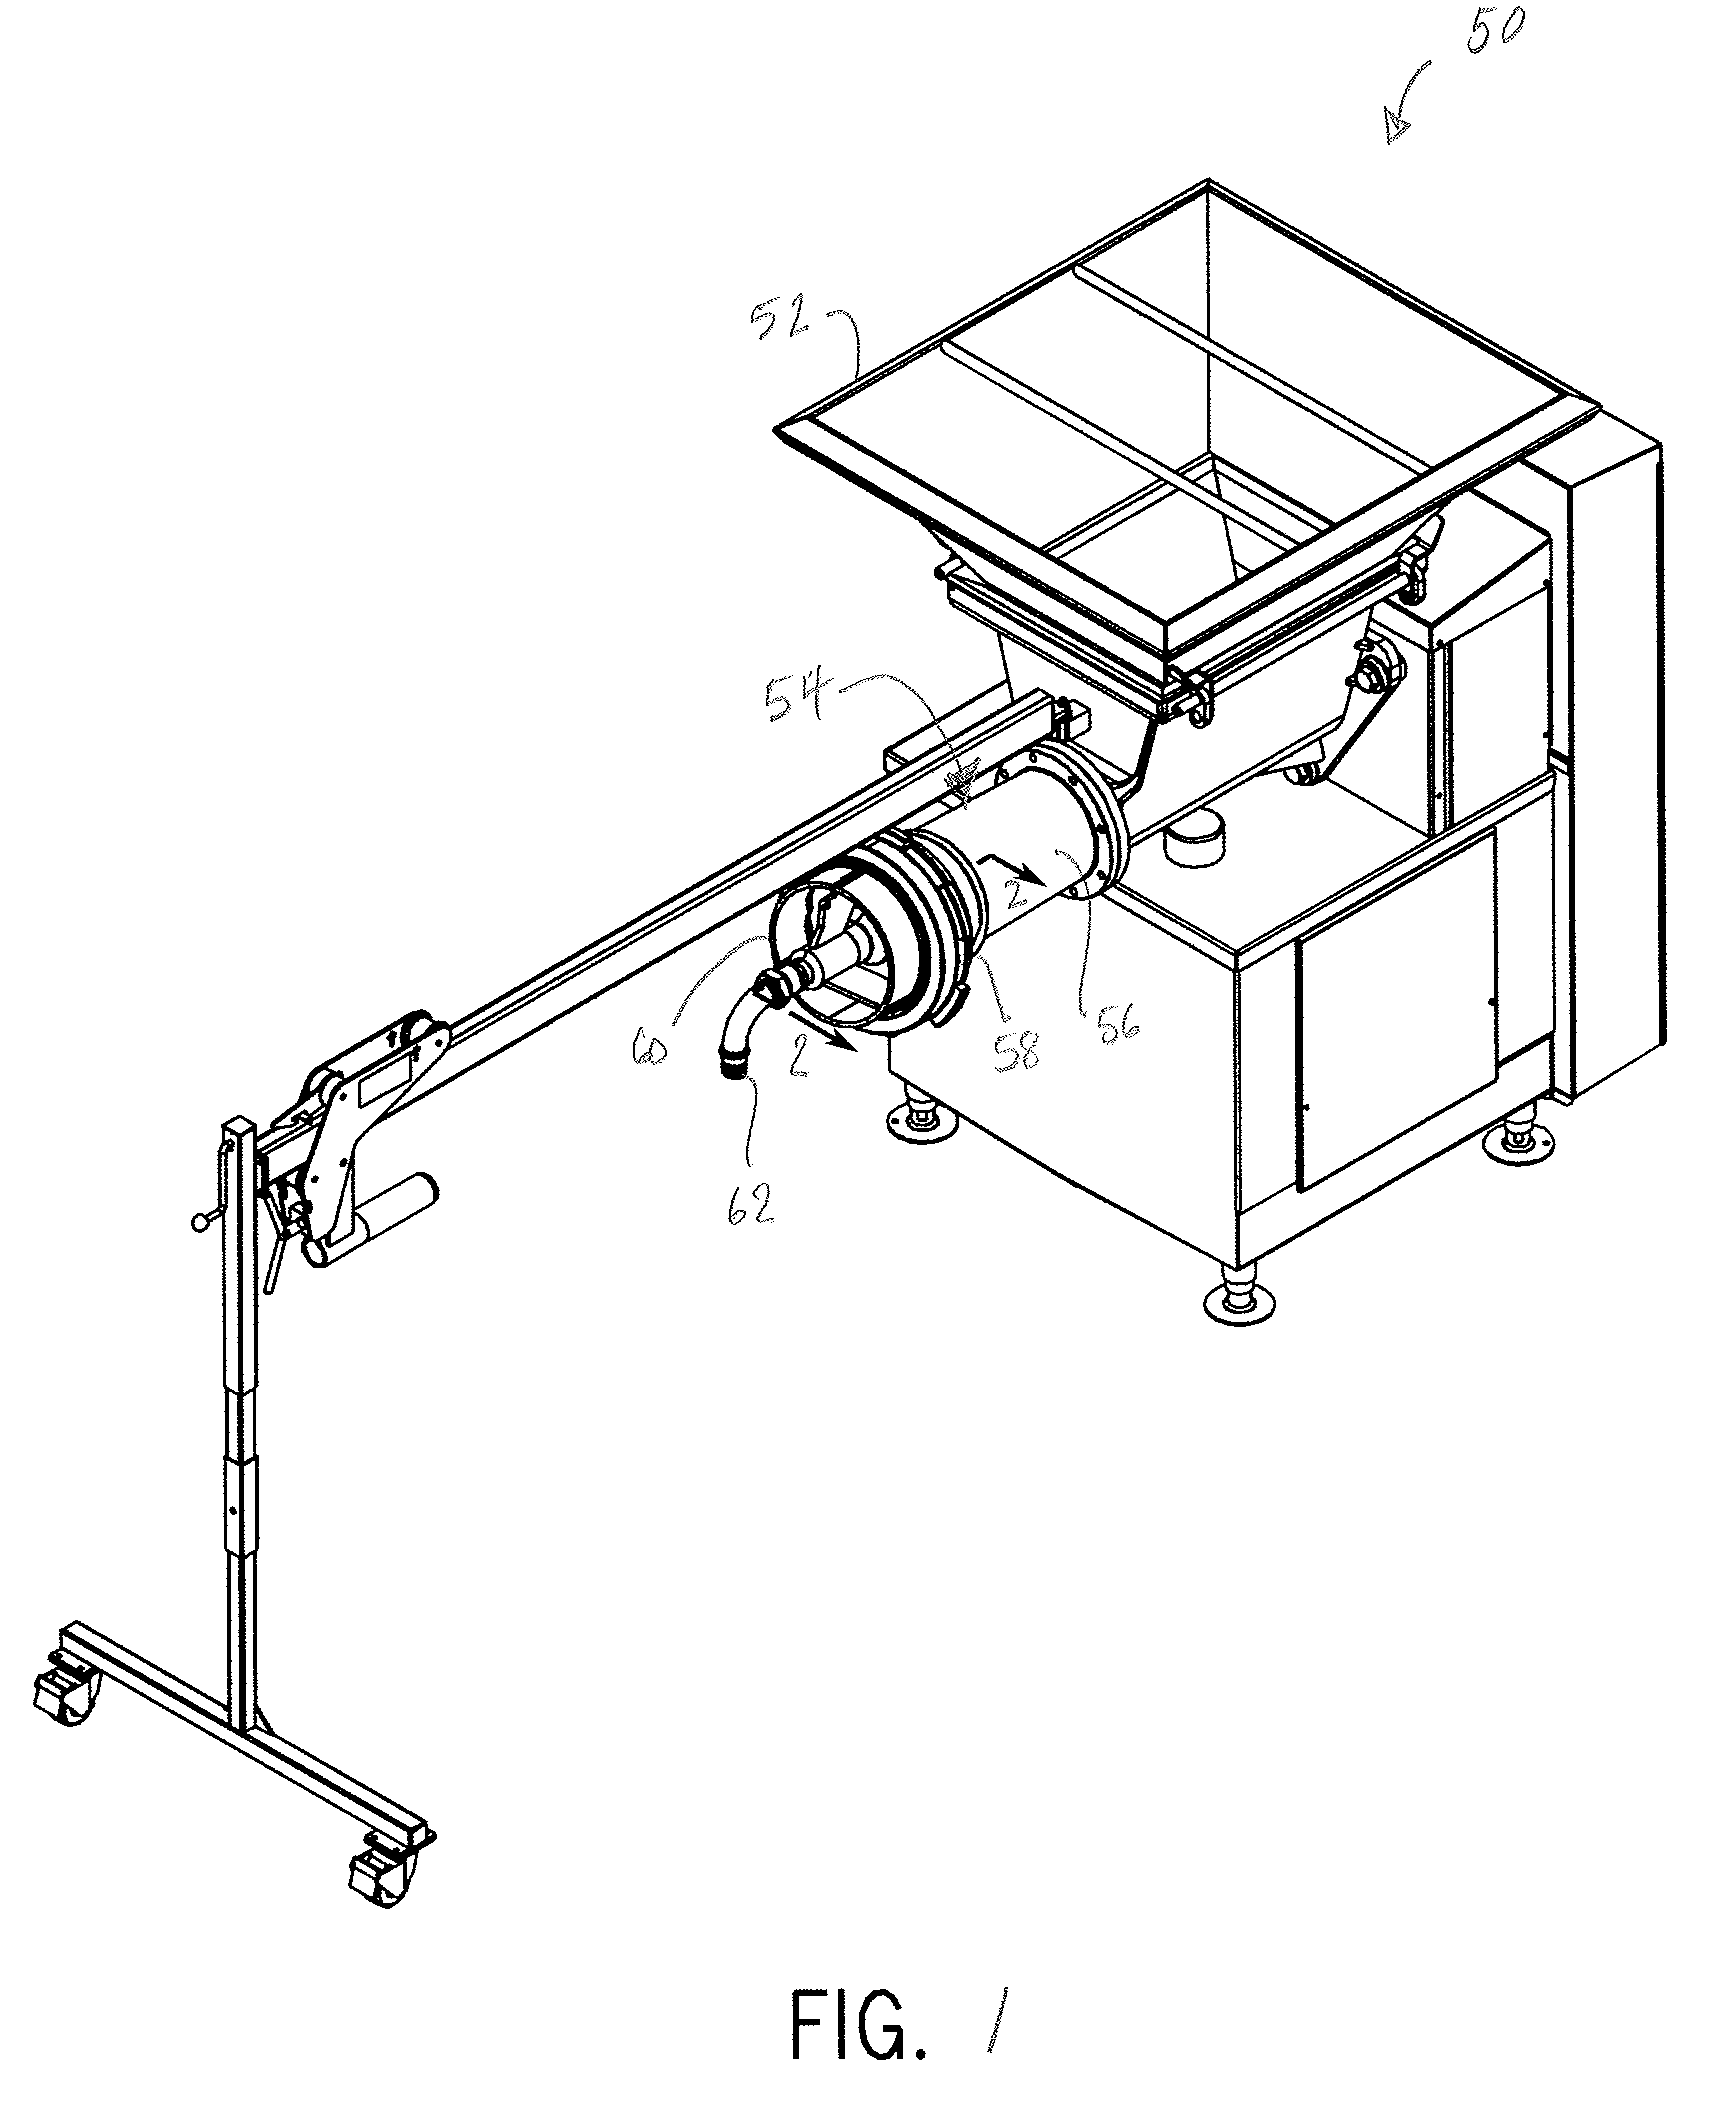 Secondary grinding section for an orifice plate of a grinding machine